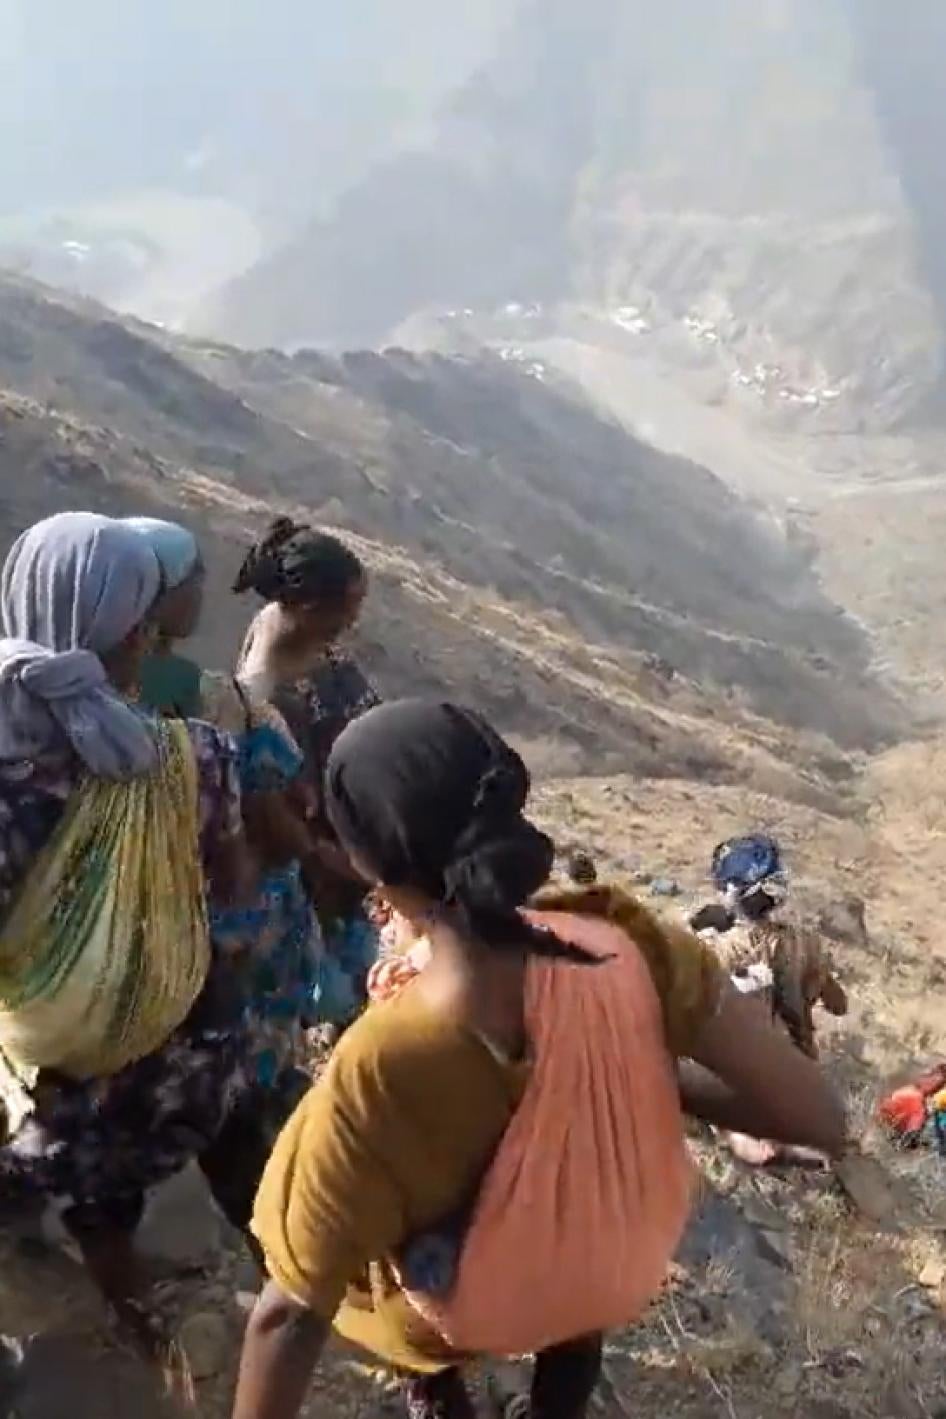 A video published on TikTok on July 31, 2022 and geolocated by Human Rights Watch shows a group of 22 migrants, 20 of whom appear to be women, descending a steep slope inside Saudi Arabia near the trail used to cross from the migrant camp of Al Thabit.